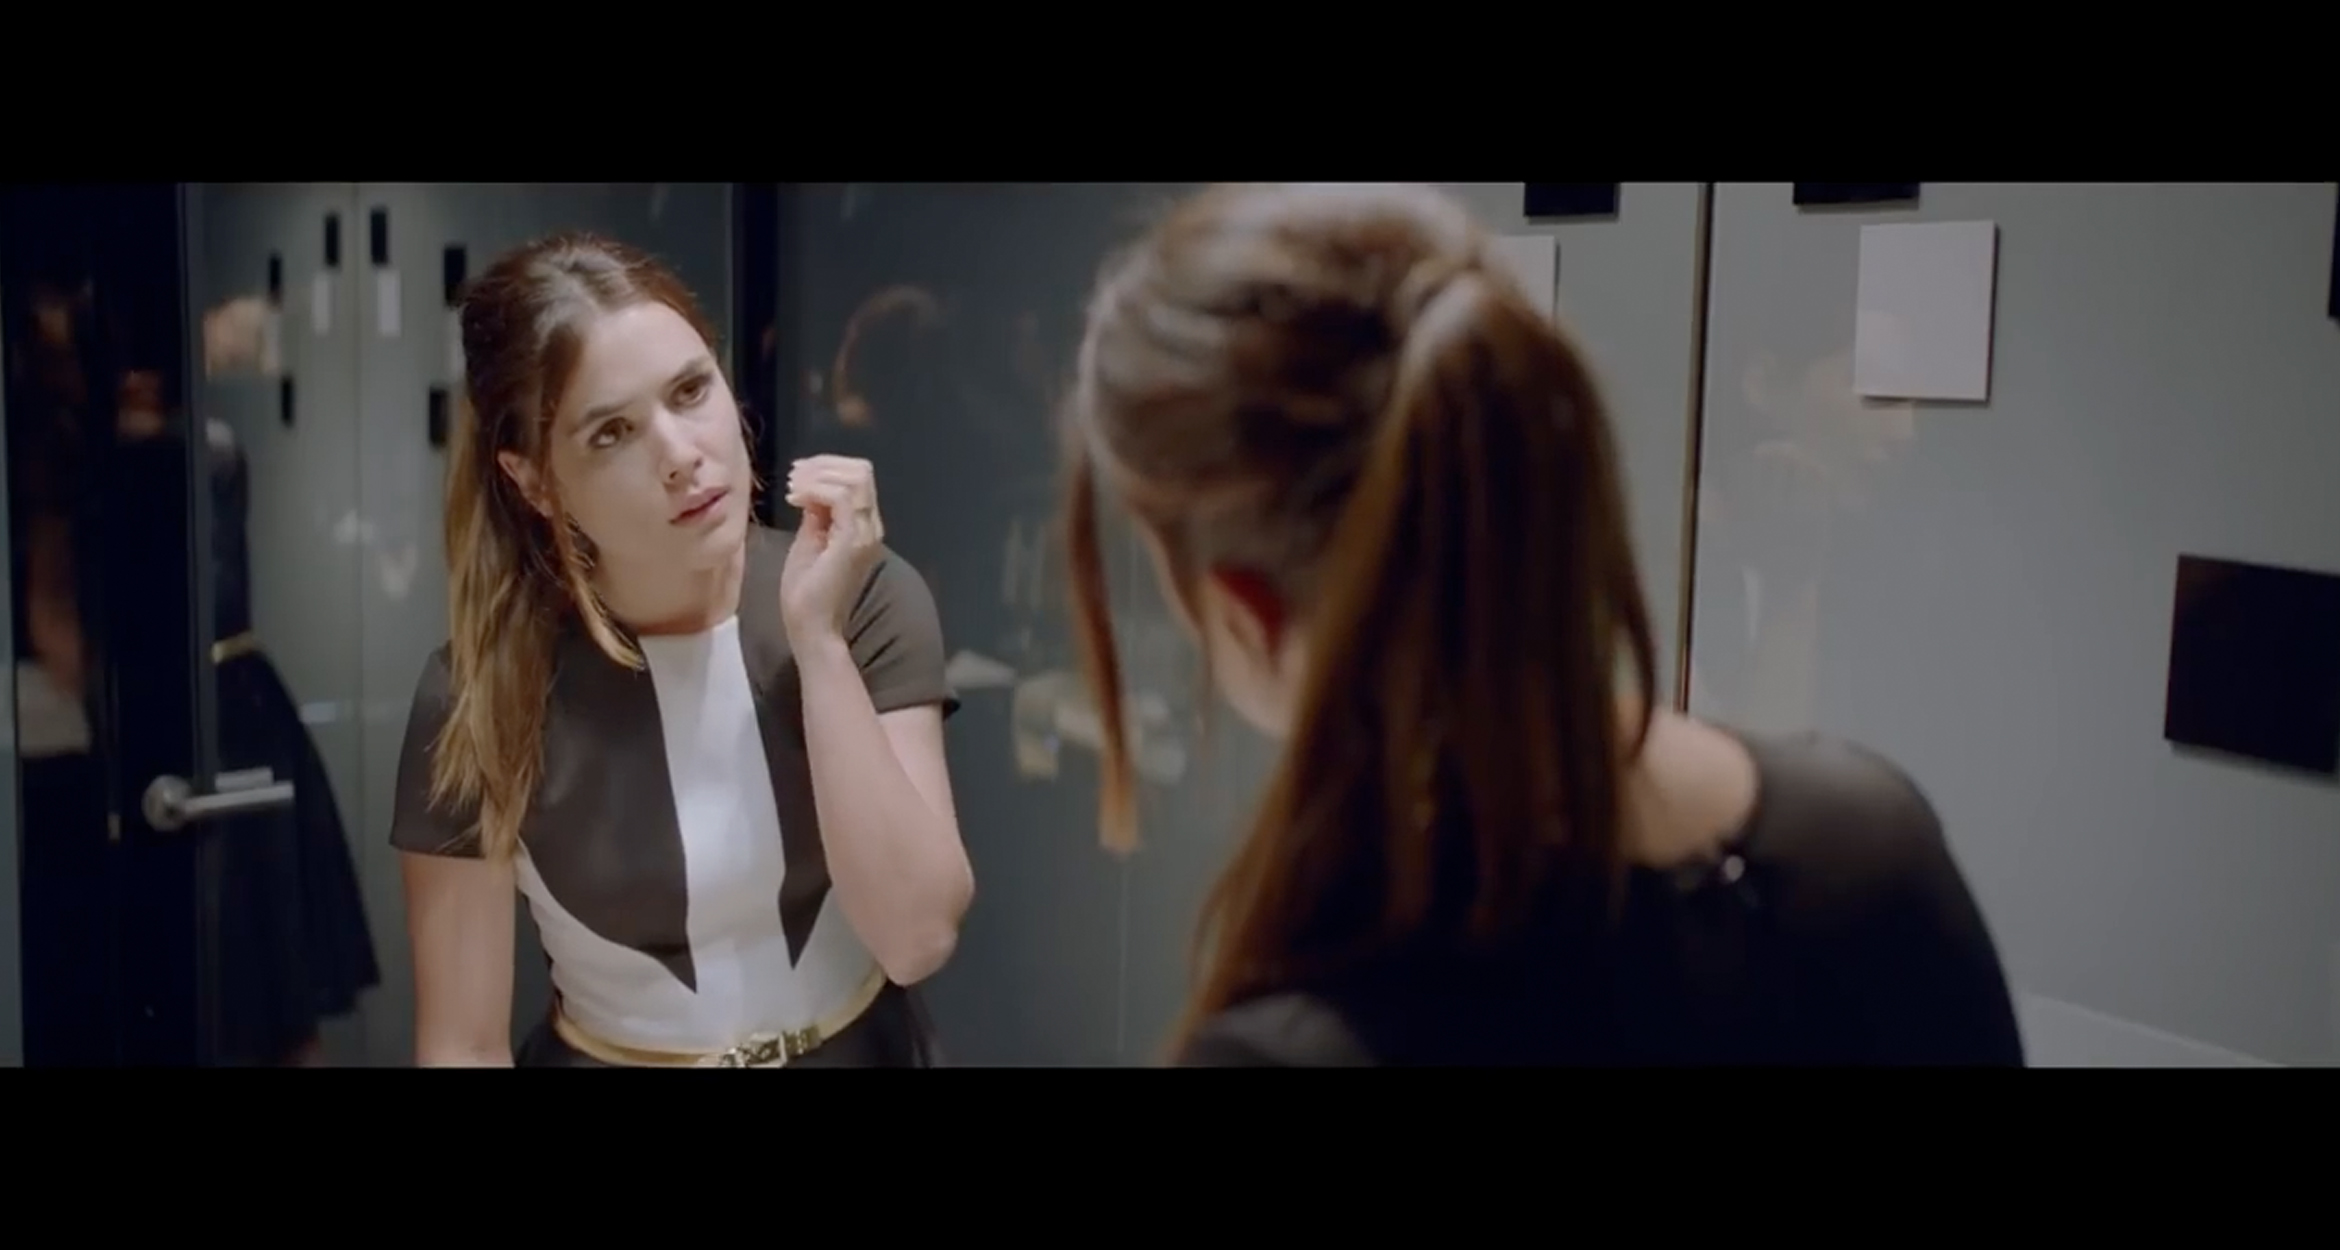 Screenshot from Beyond Money short film: Woman looking at her reflection in a mirror. 